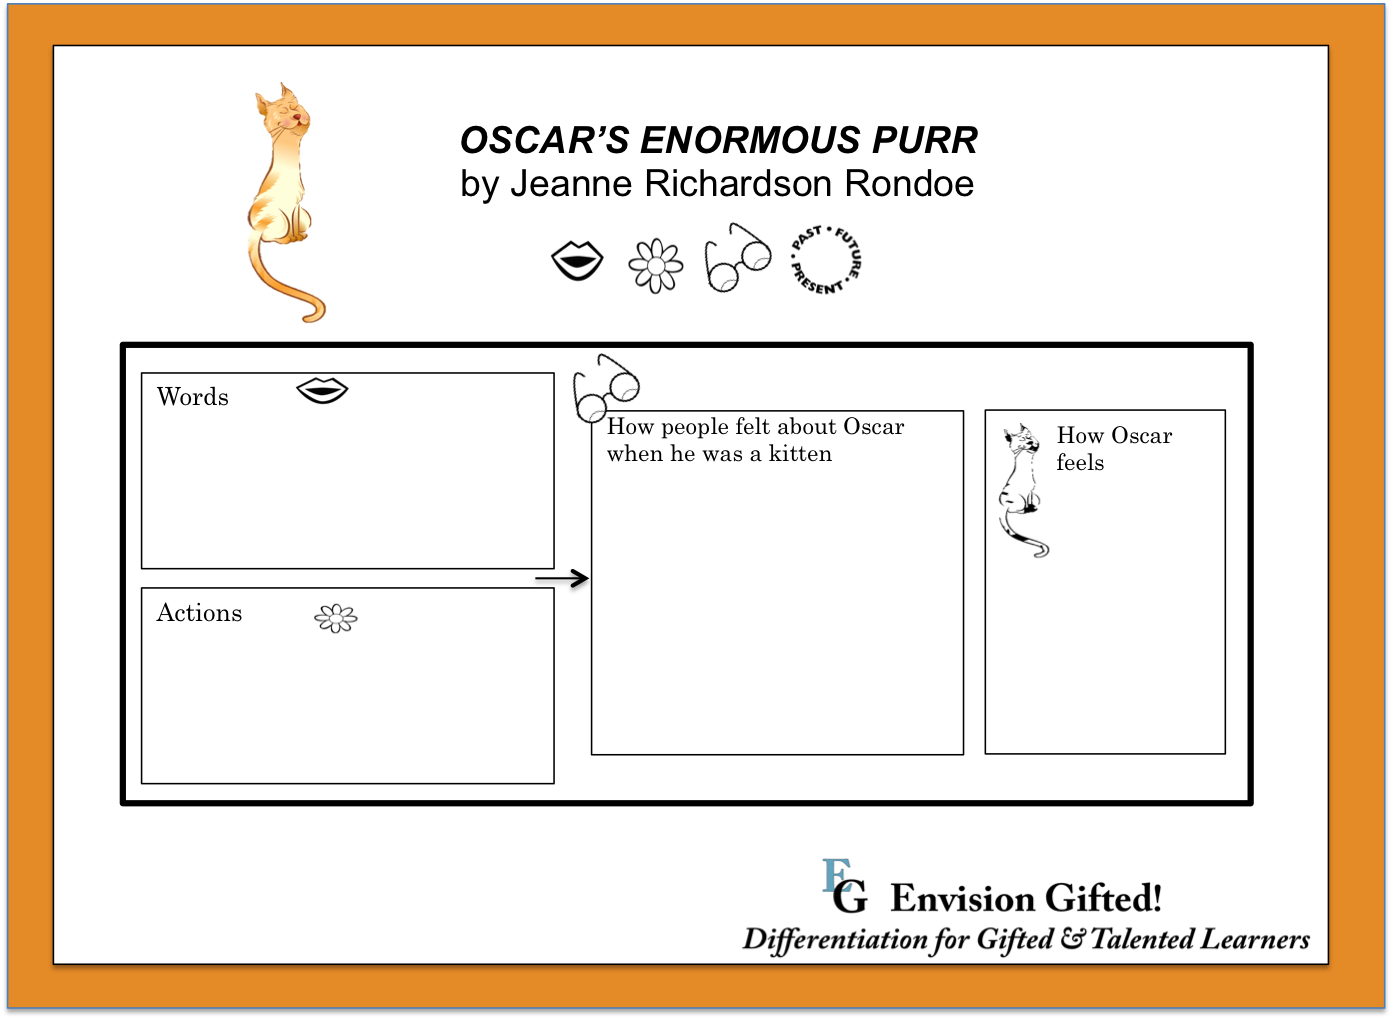 Envision Gifted. Image of template for Oscar's Enormous Purr